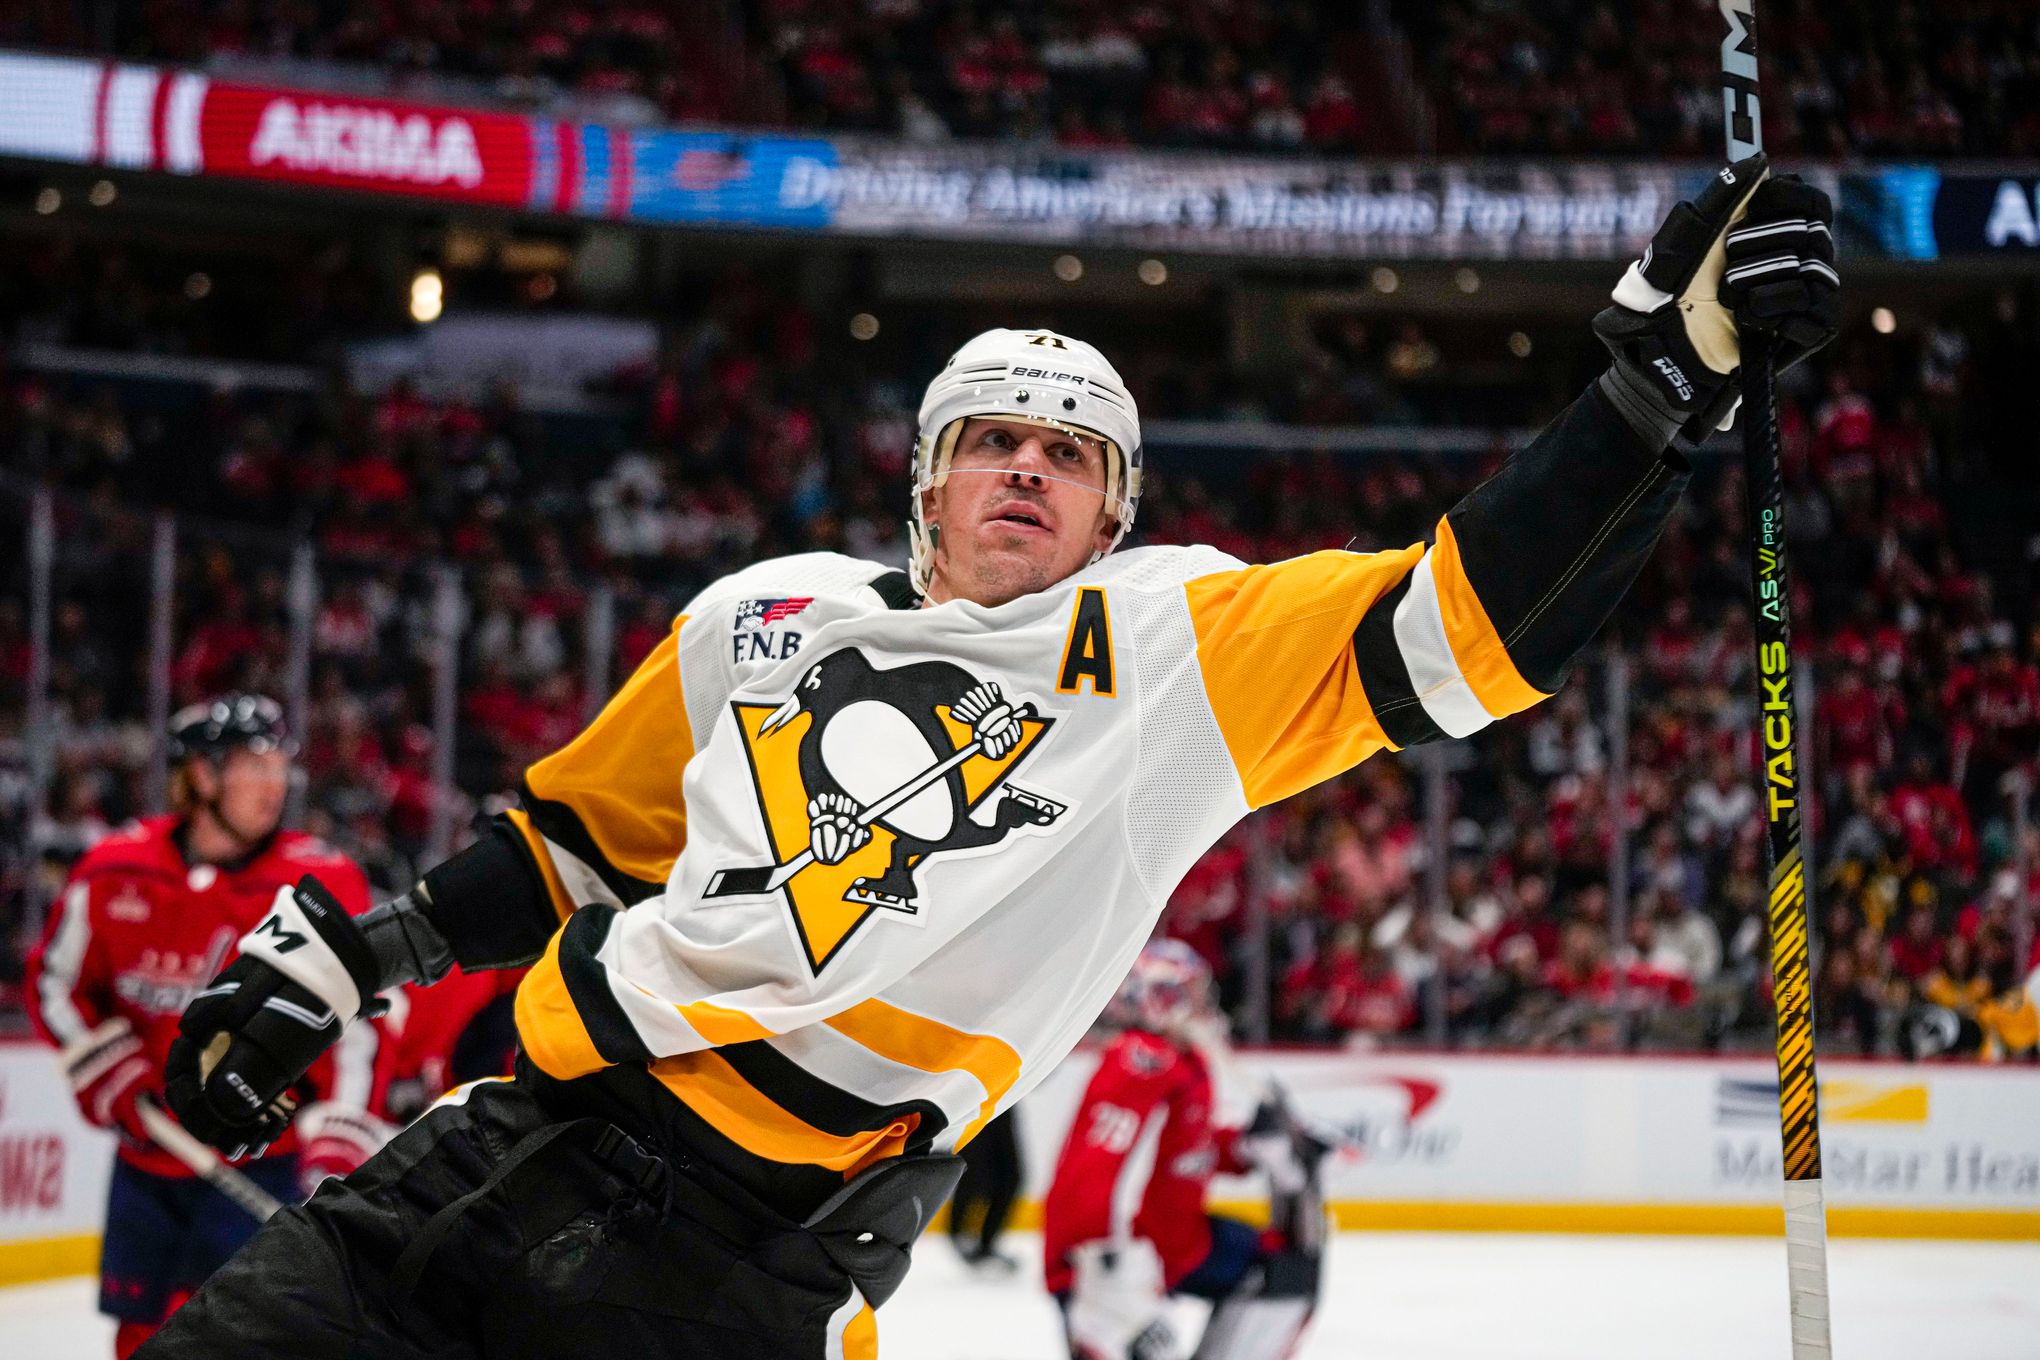 Crosby and Malkin lead the way as the Penguins beat the Capitals